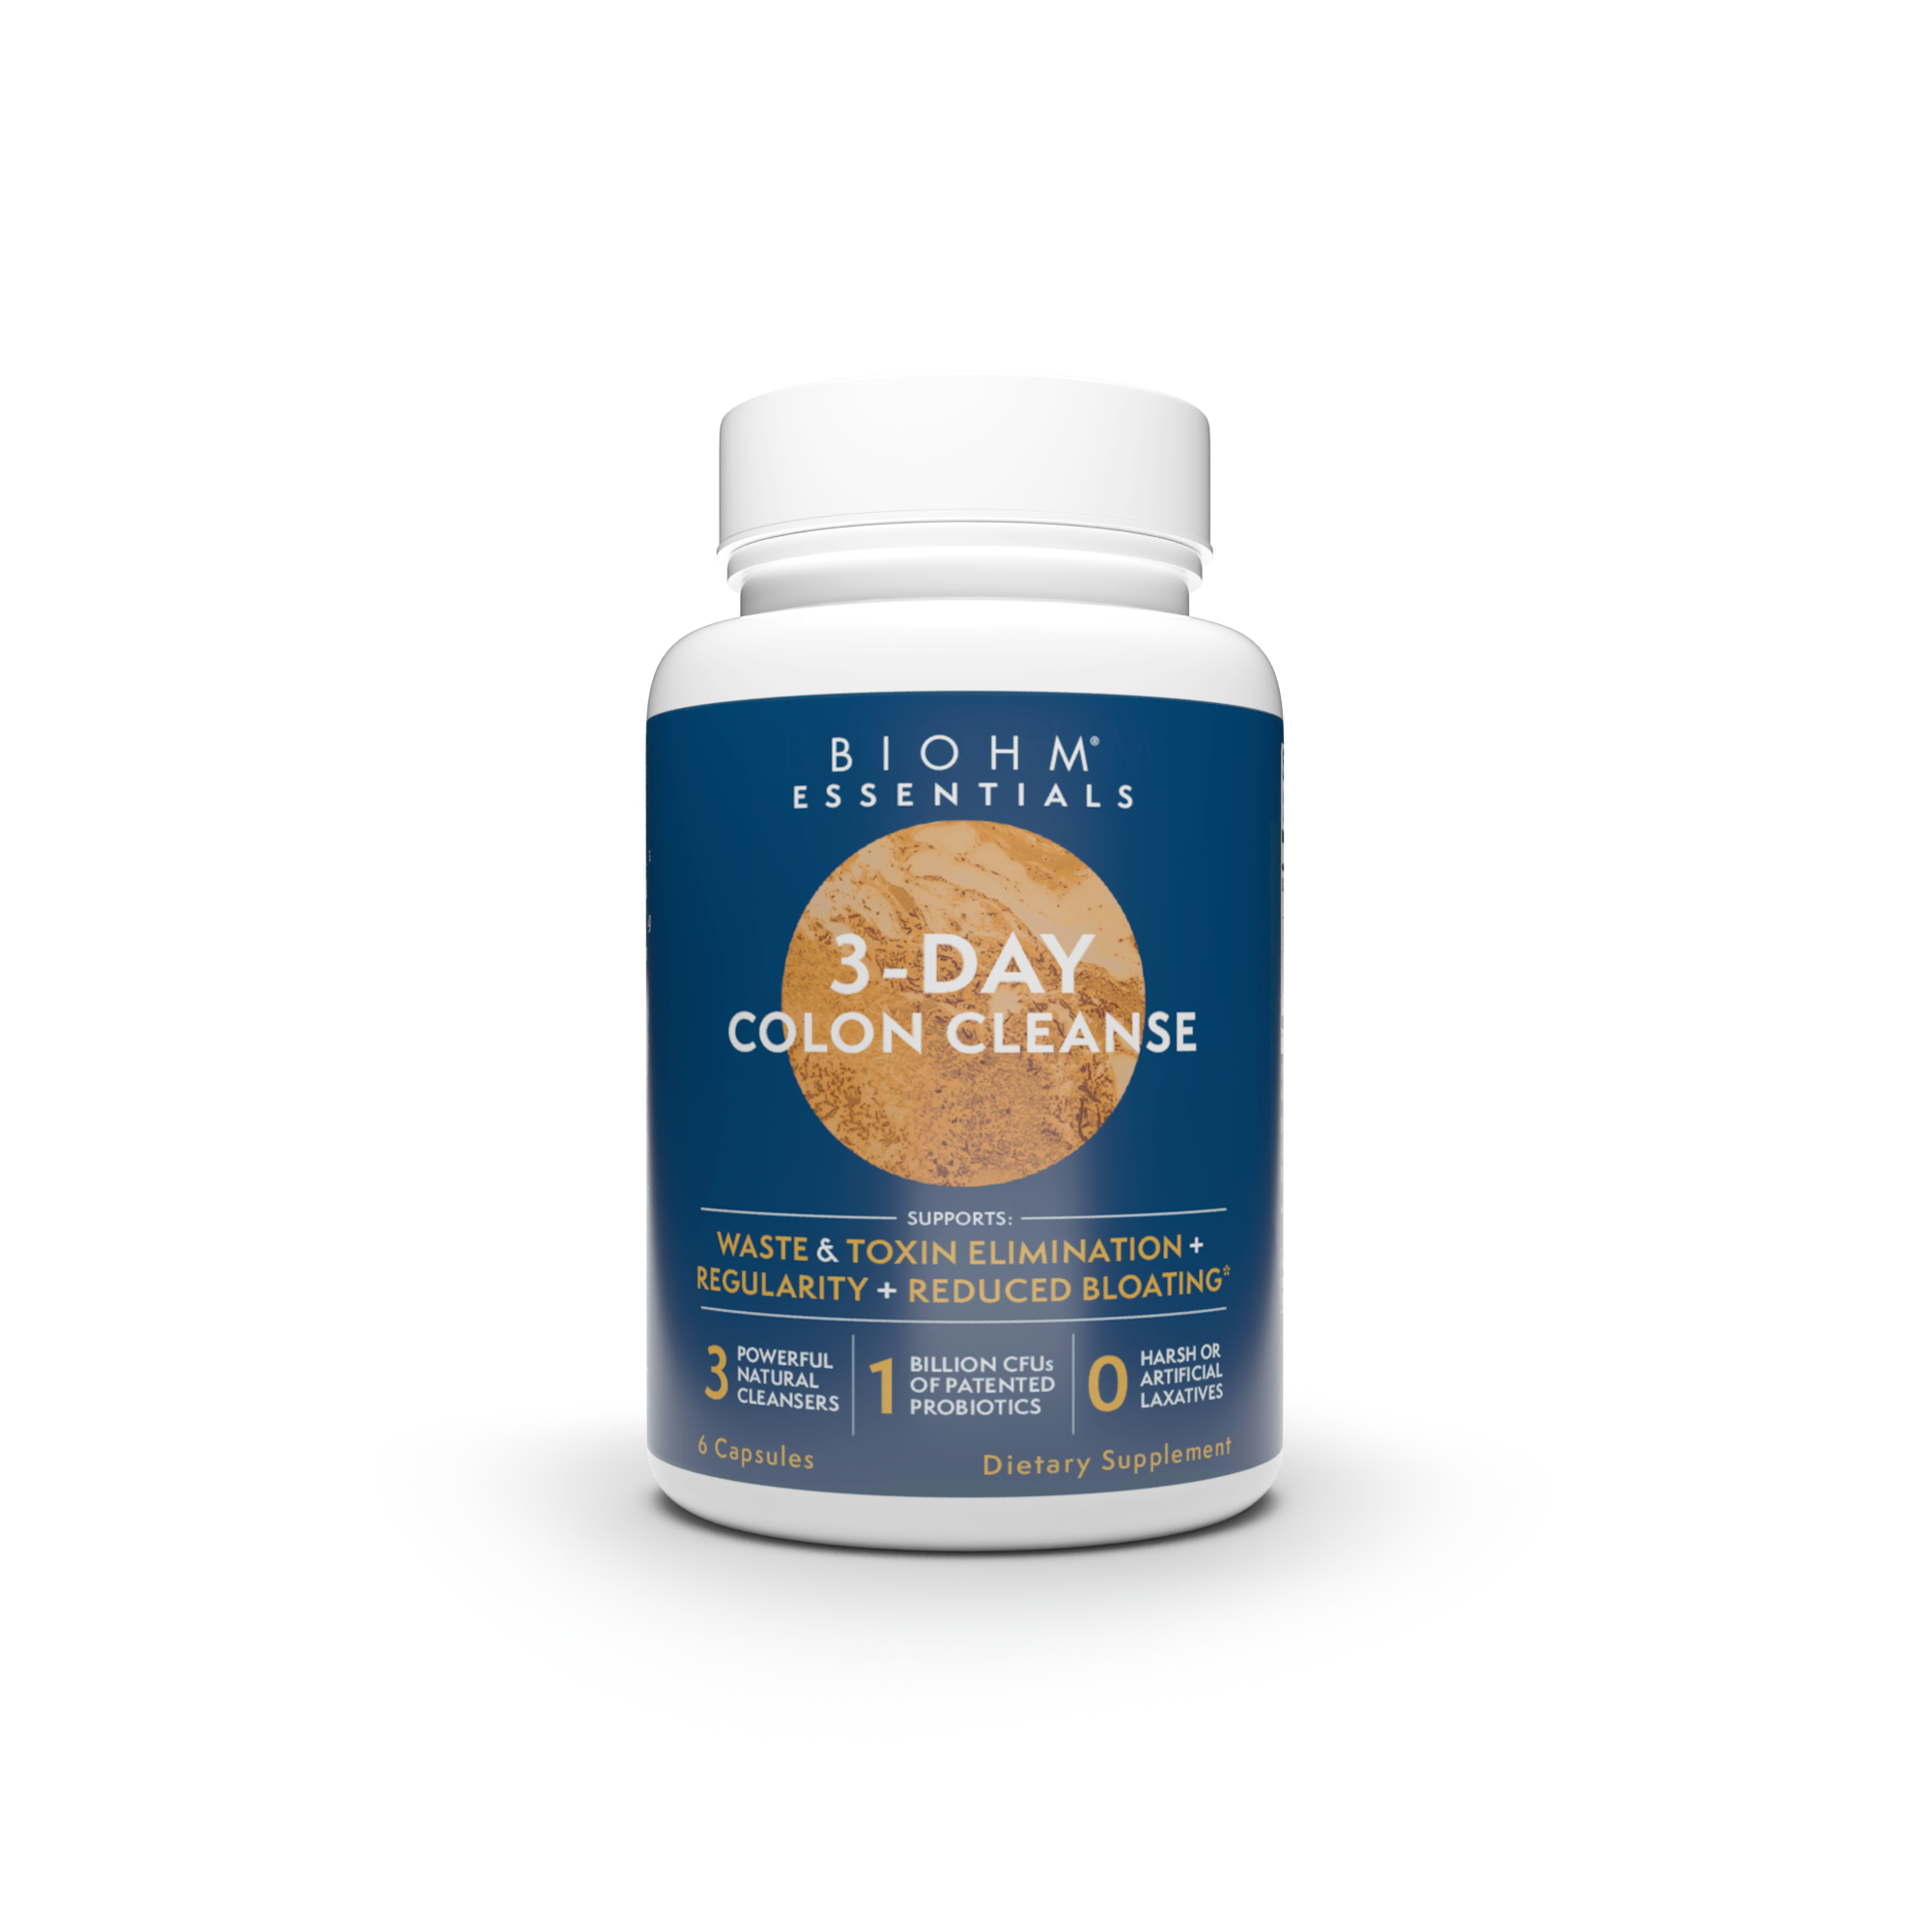 3-day colon cleanse